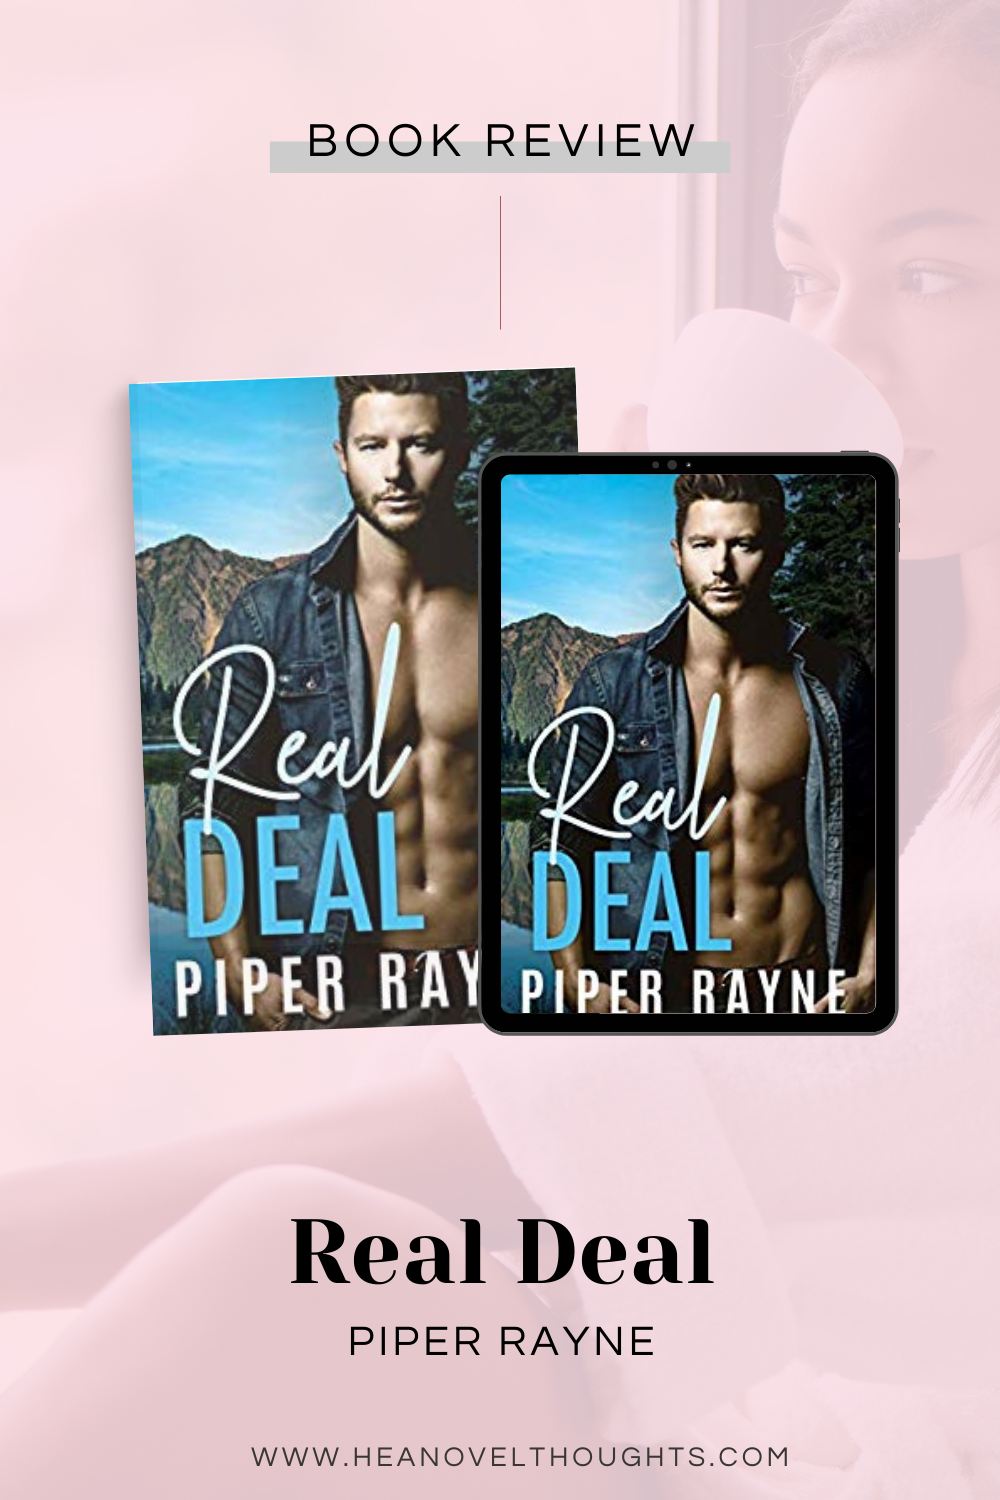 Real Deal by Piper Rayne